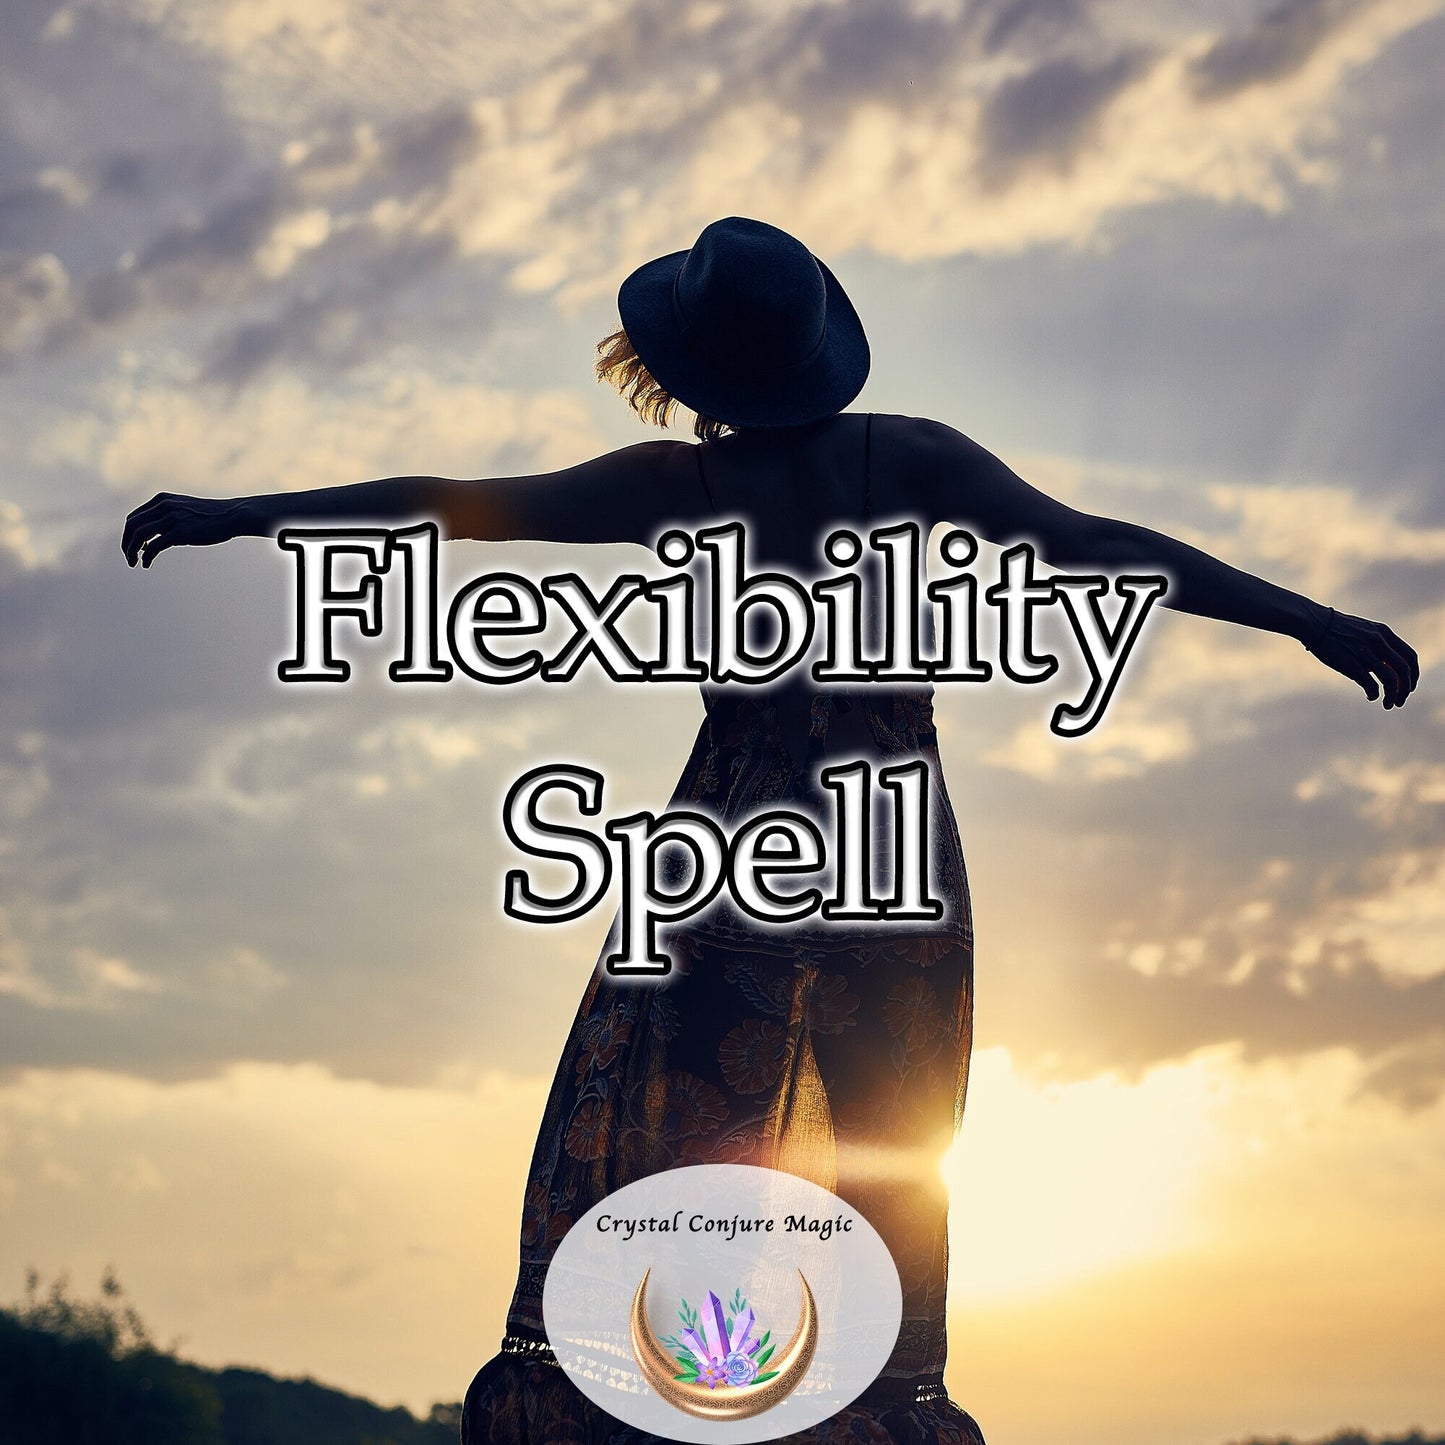 Flexibility Spell - empowers you to bend, twist, and adapt in ways you never thought possible